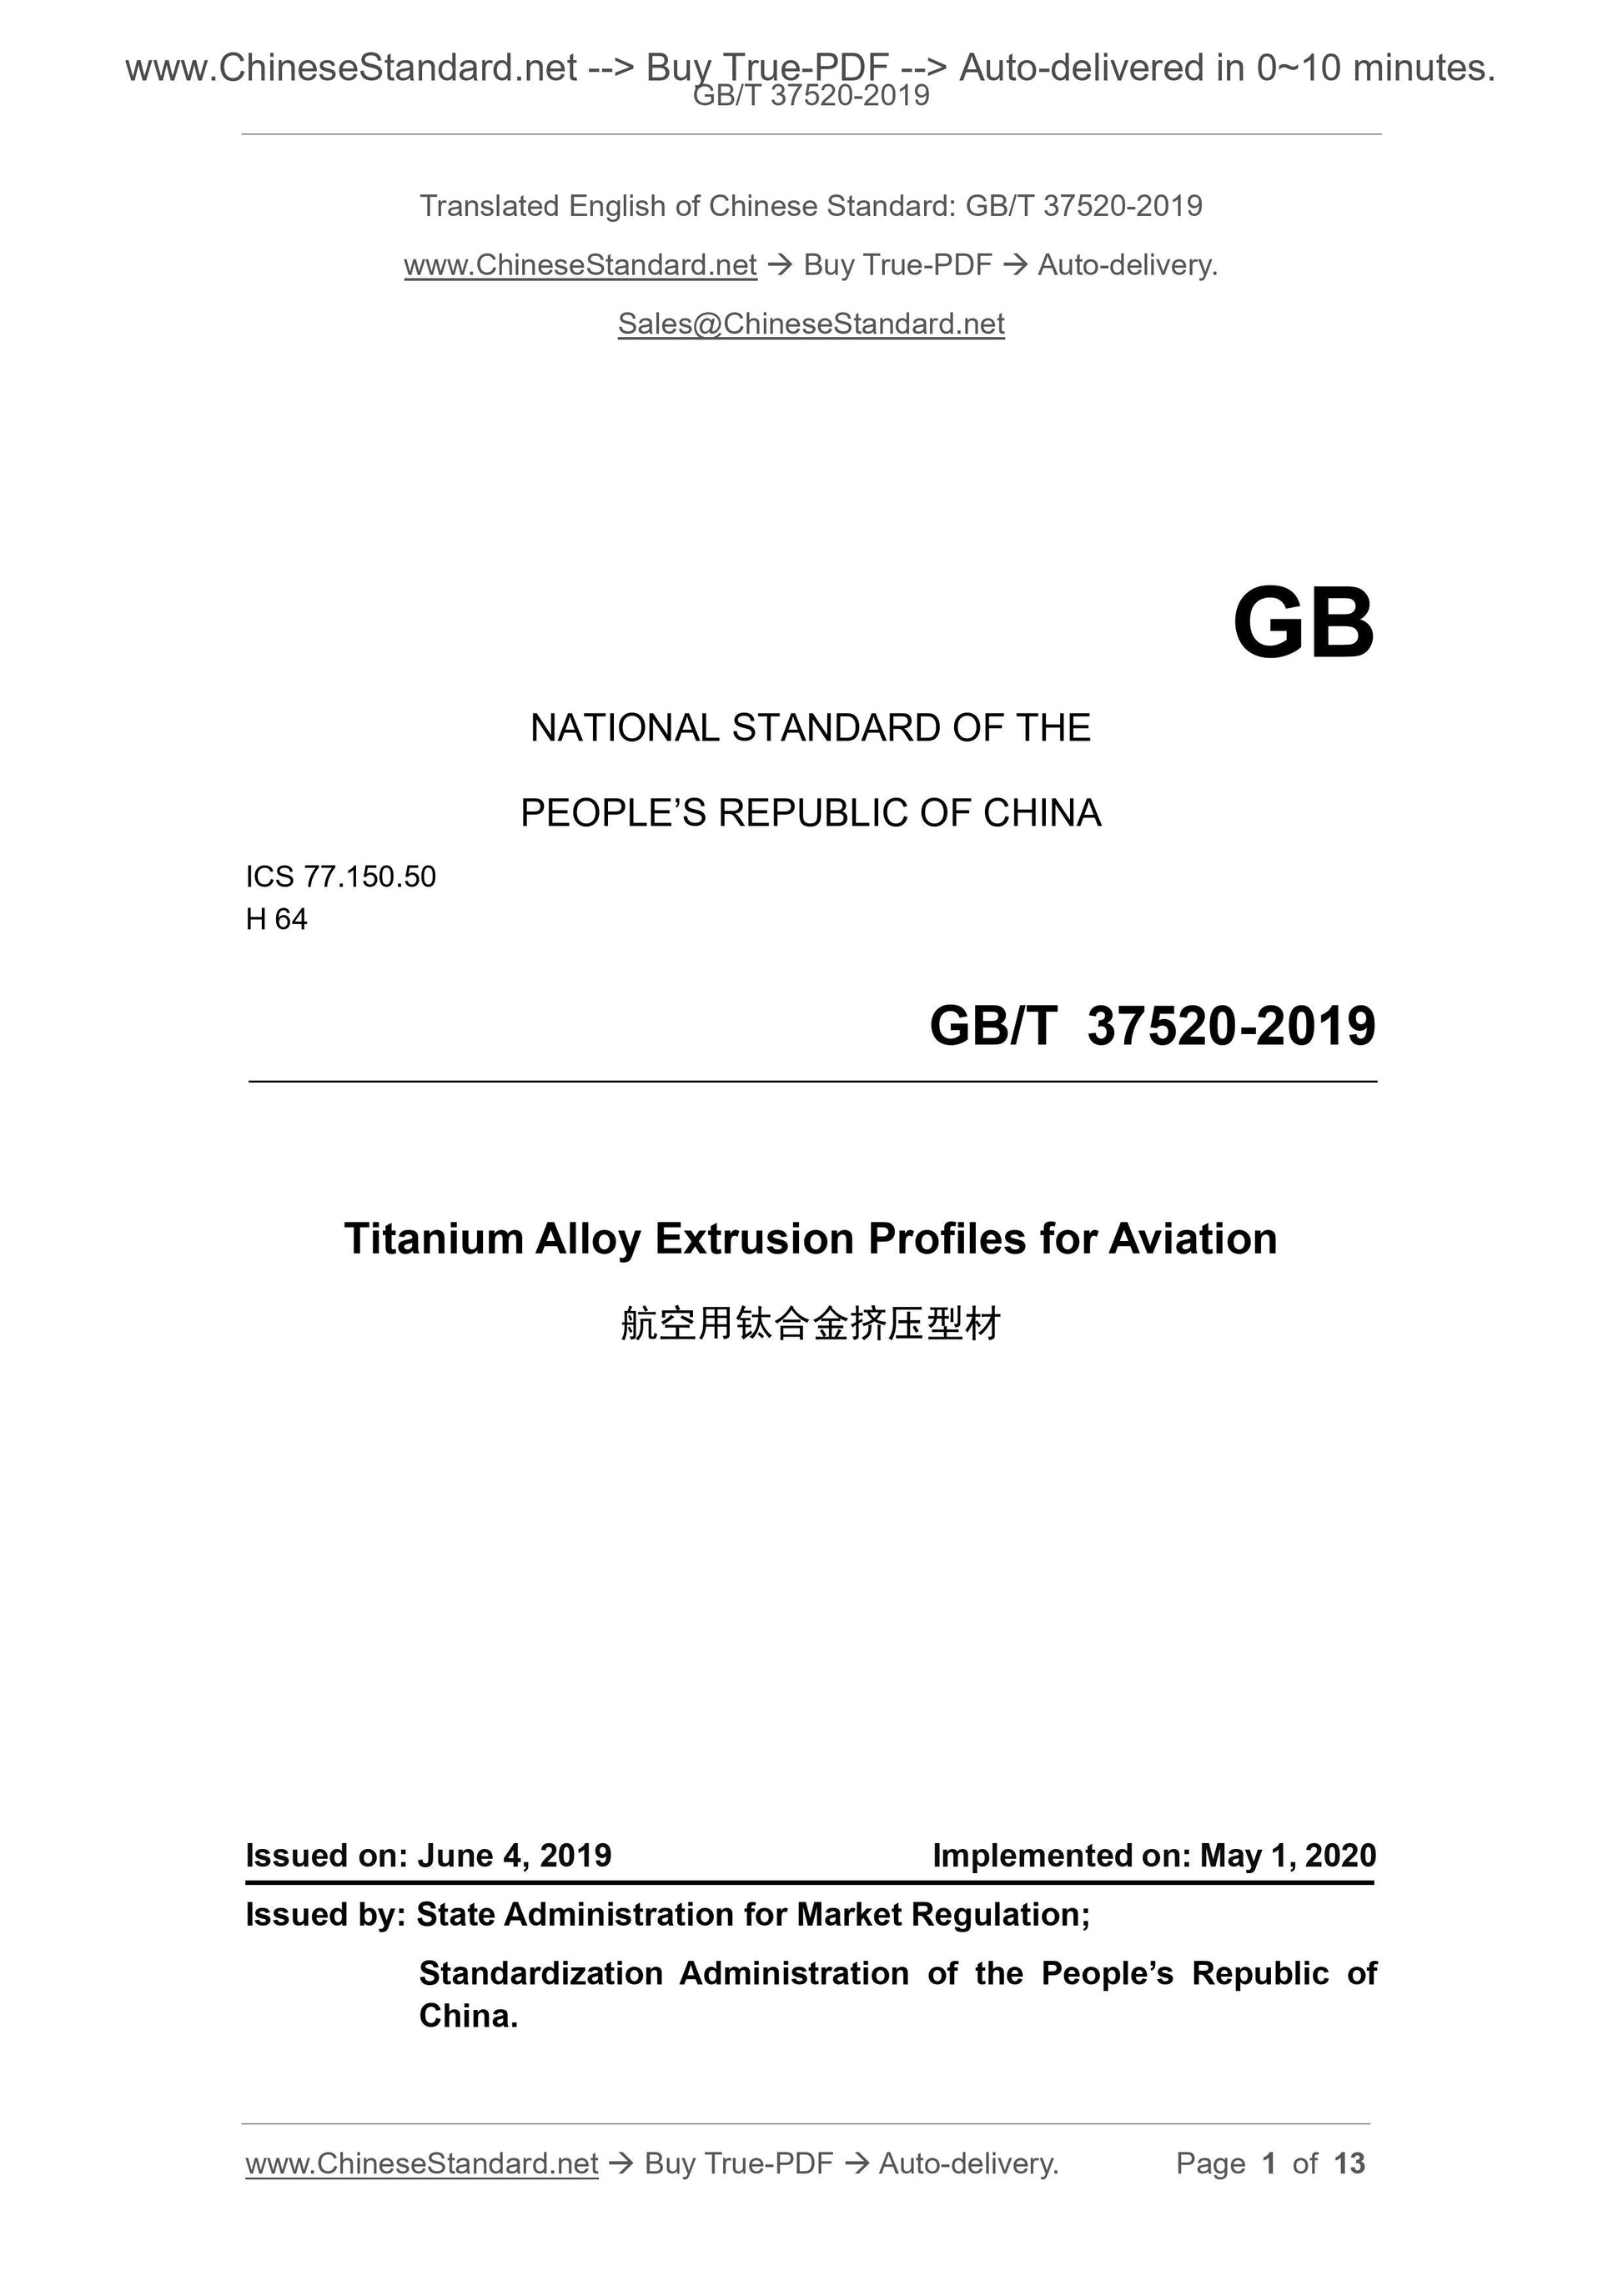 GB/T 37520-2019 Page 1